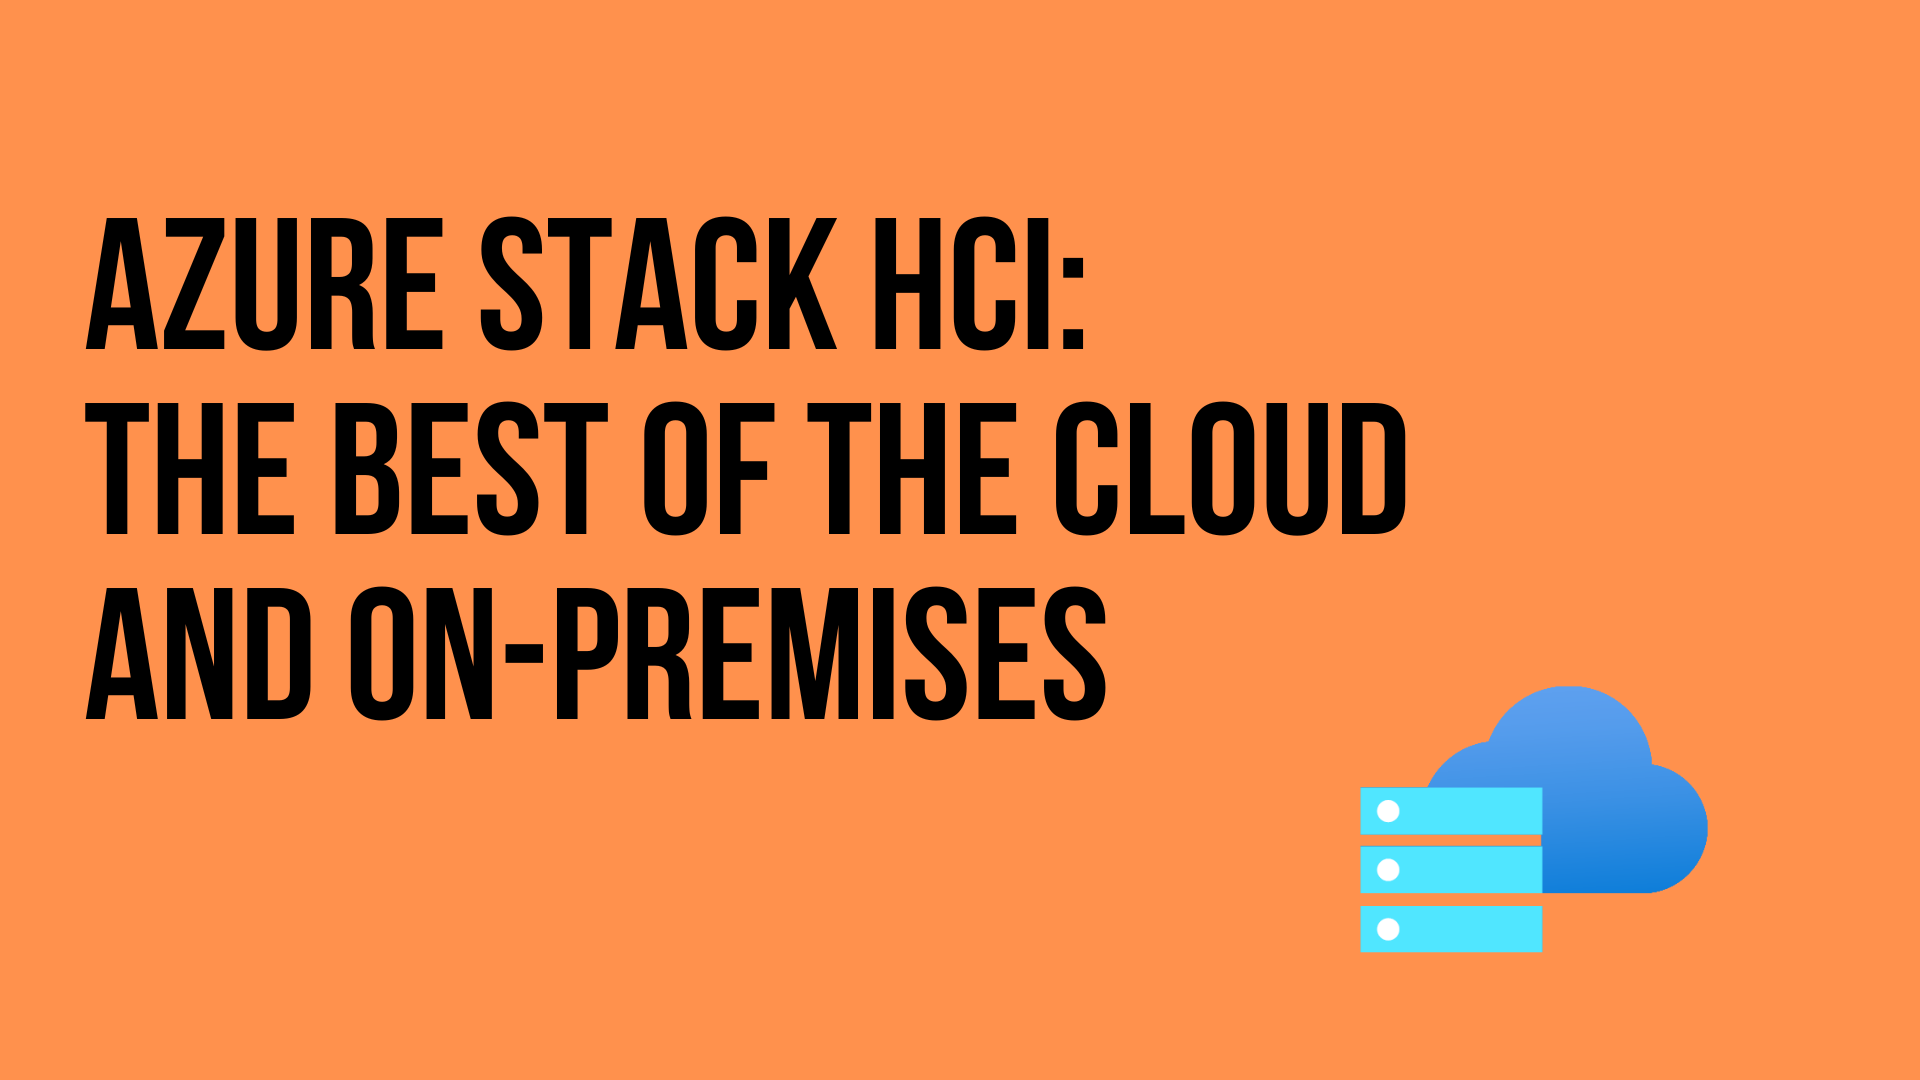 Azure Stack HCI: The best of the cloud and on-premises